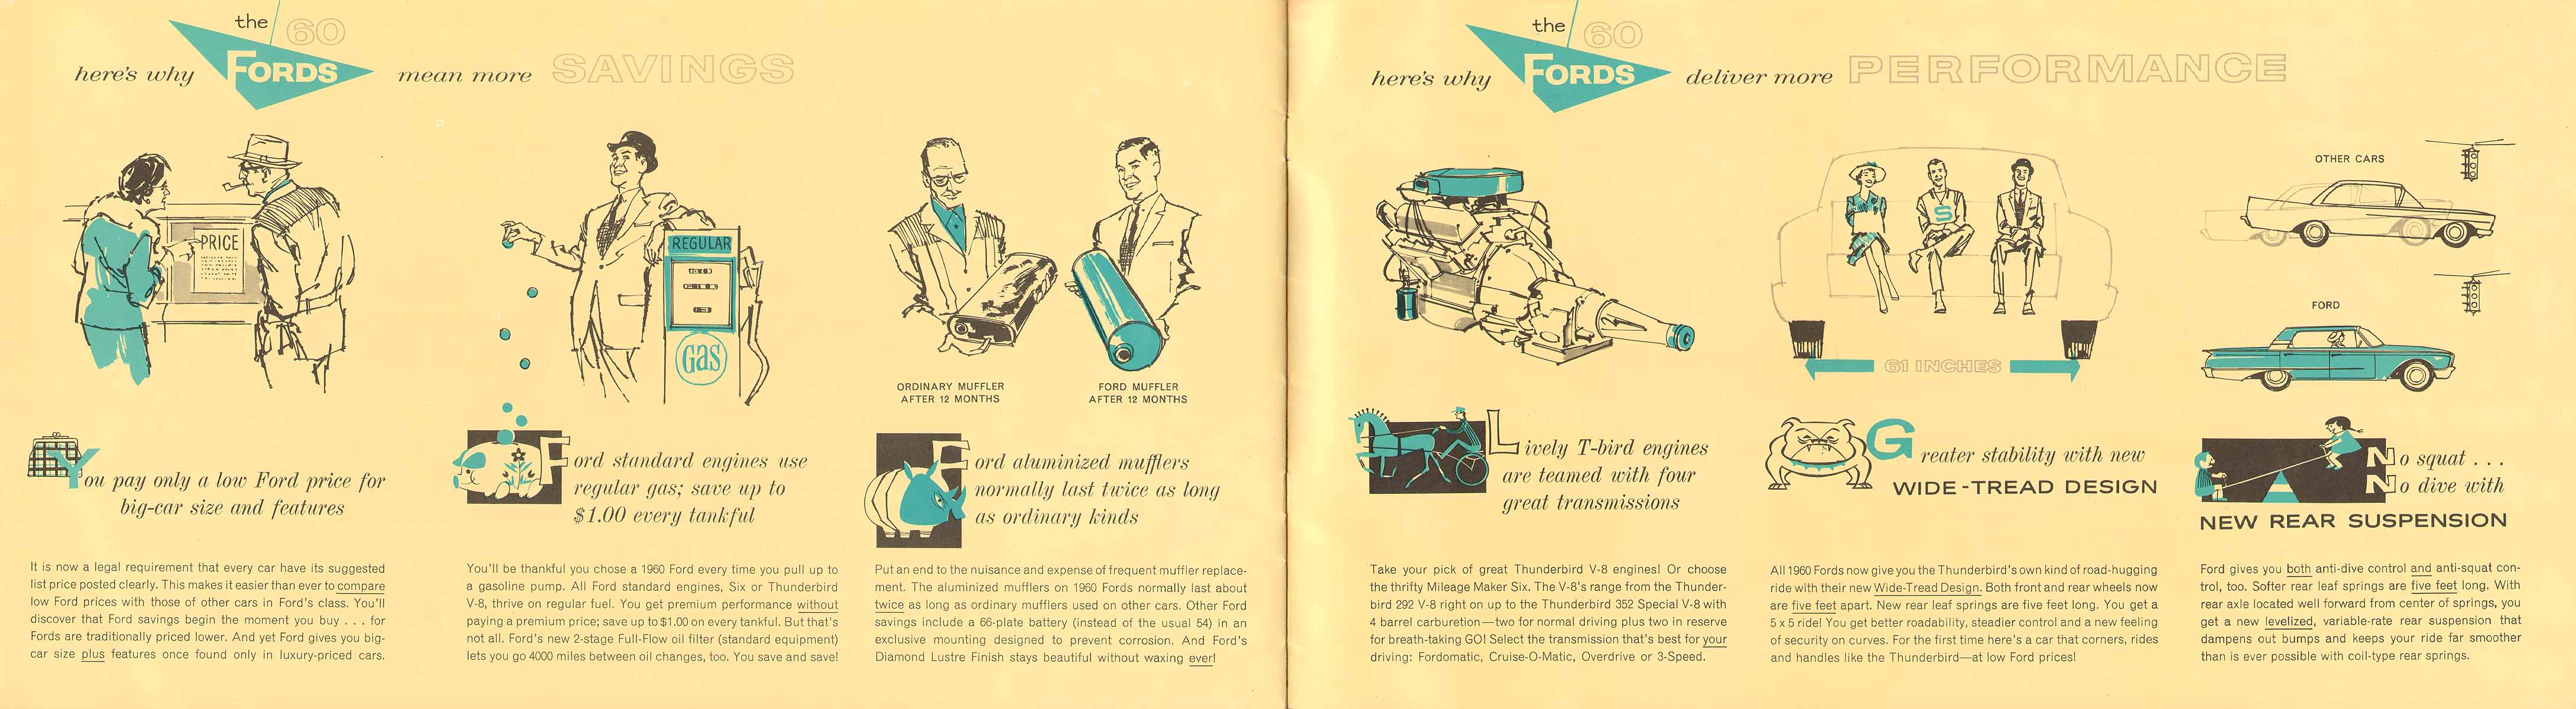 1960 Ford Brochure Page 12